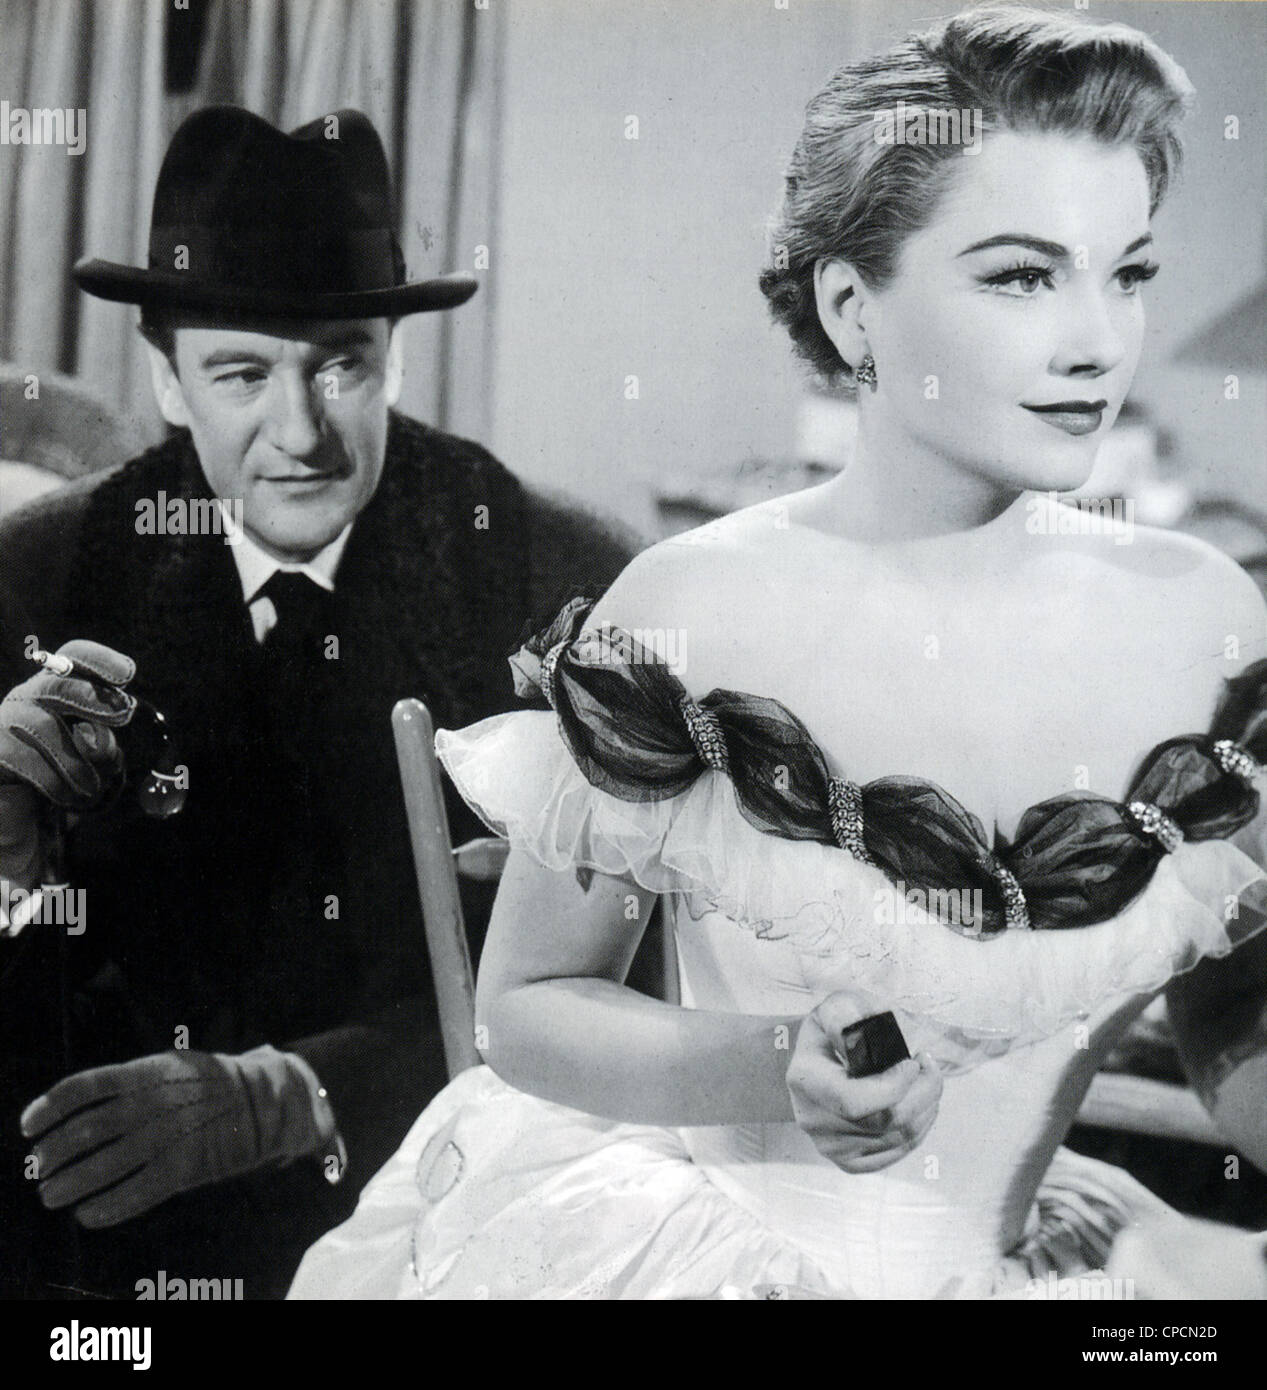 ALL ABOUT EVE 1950 TCF film with George Sanders as Addison DeWitt and Anne  Baxter as Eve Harrington Stock Photo - Alamy